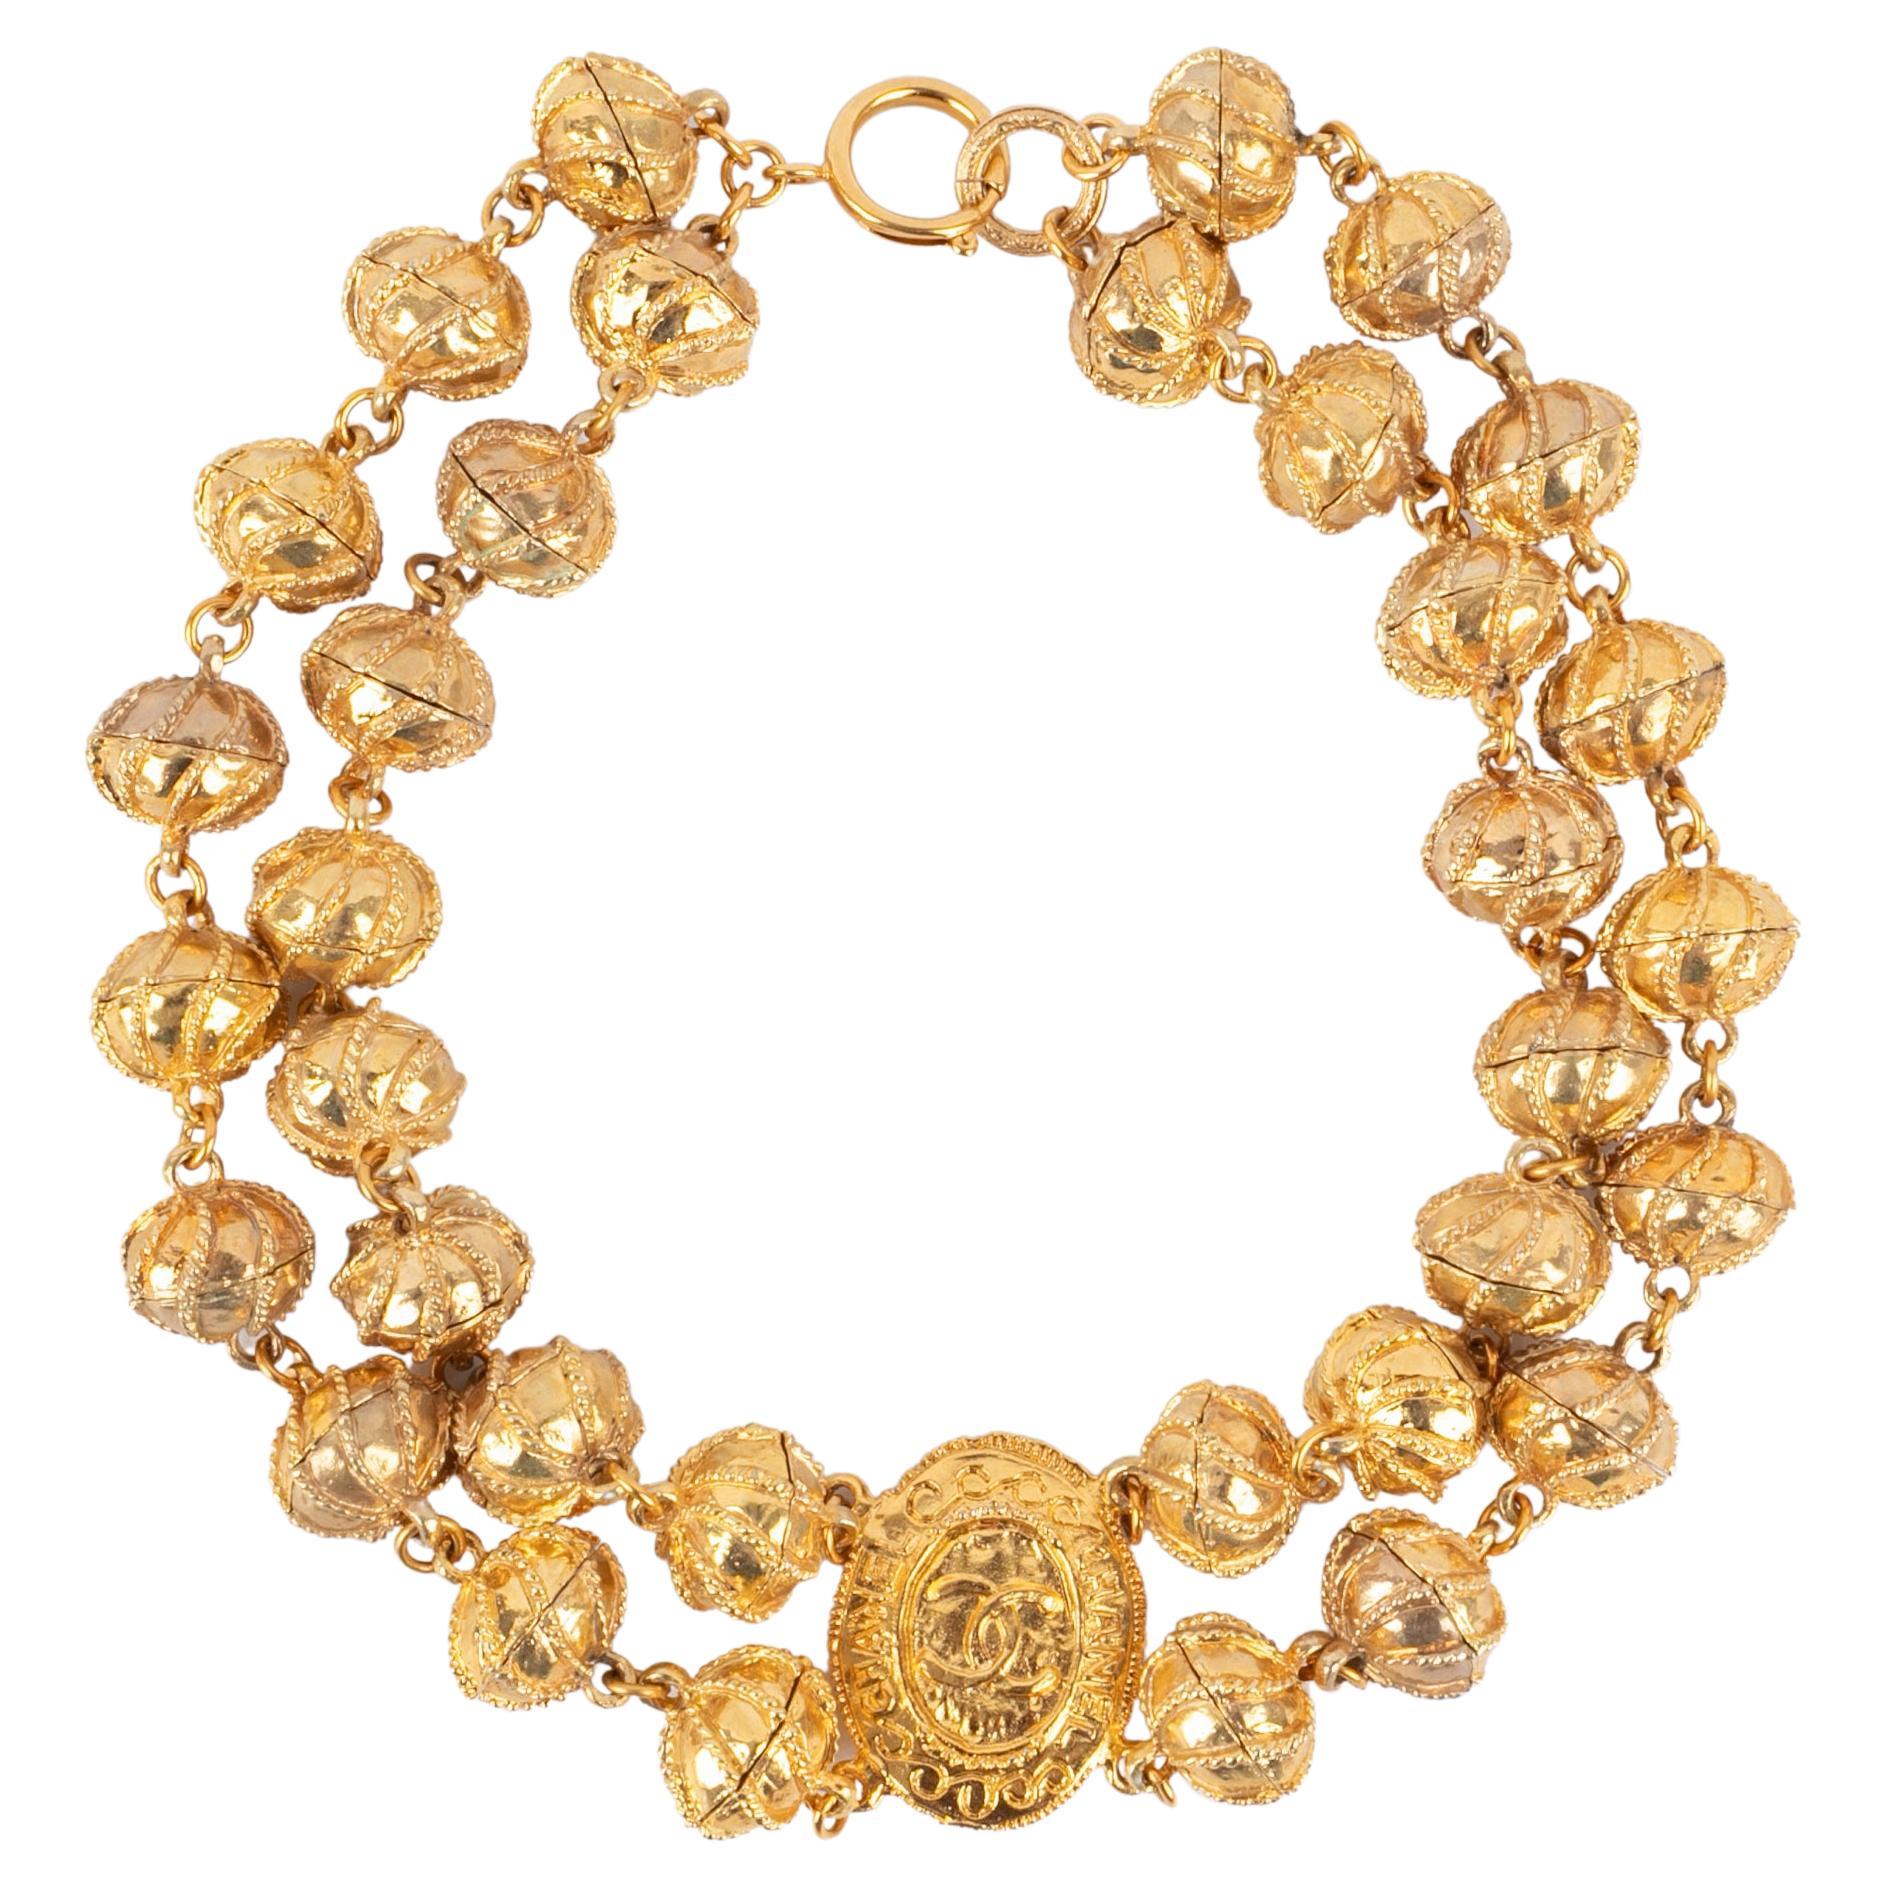 Chanel golden necklace